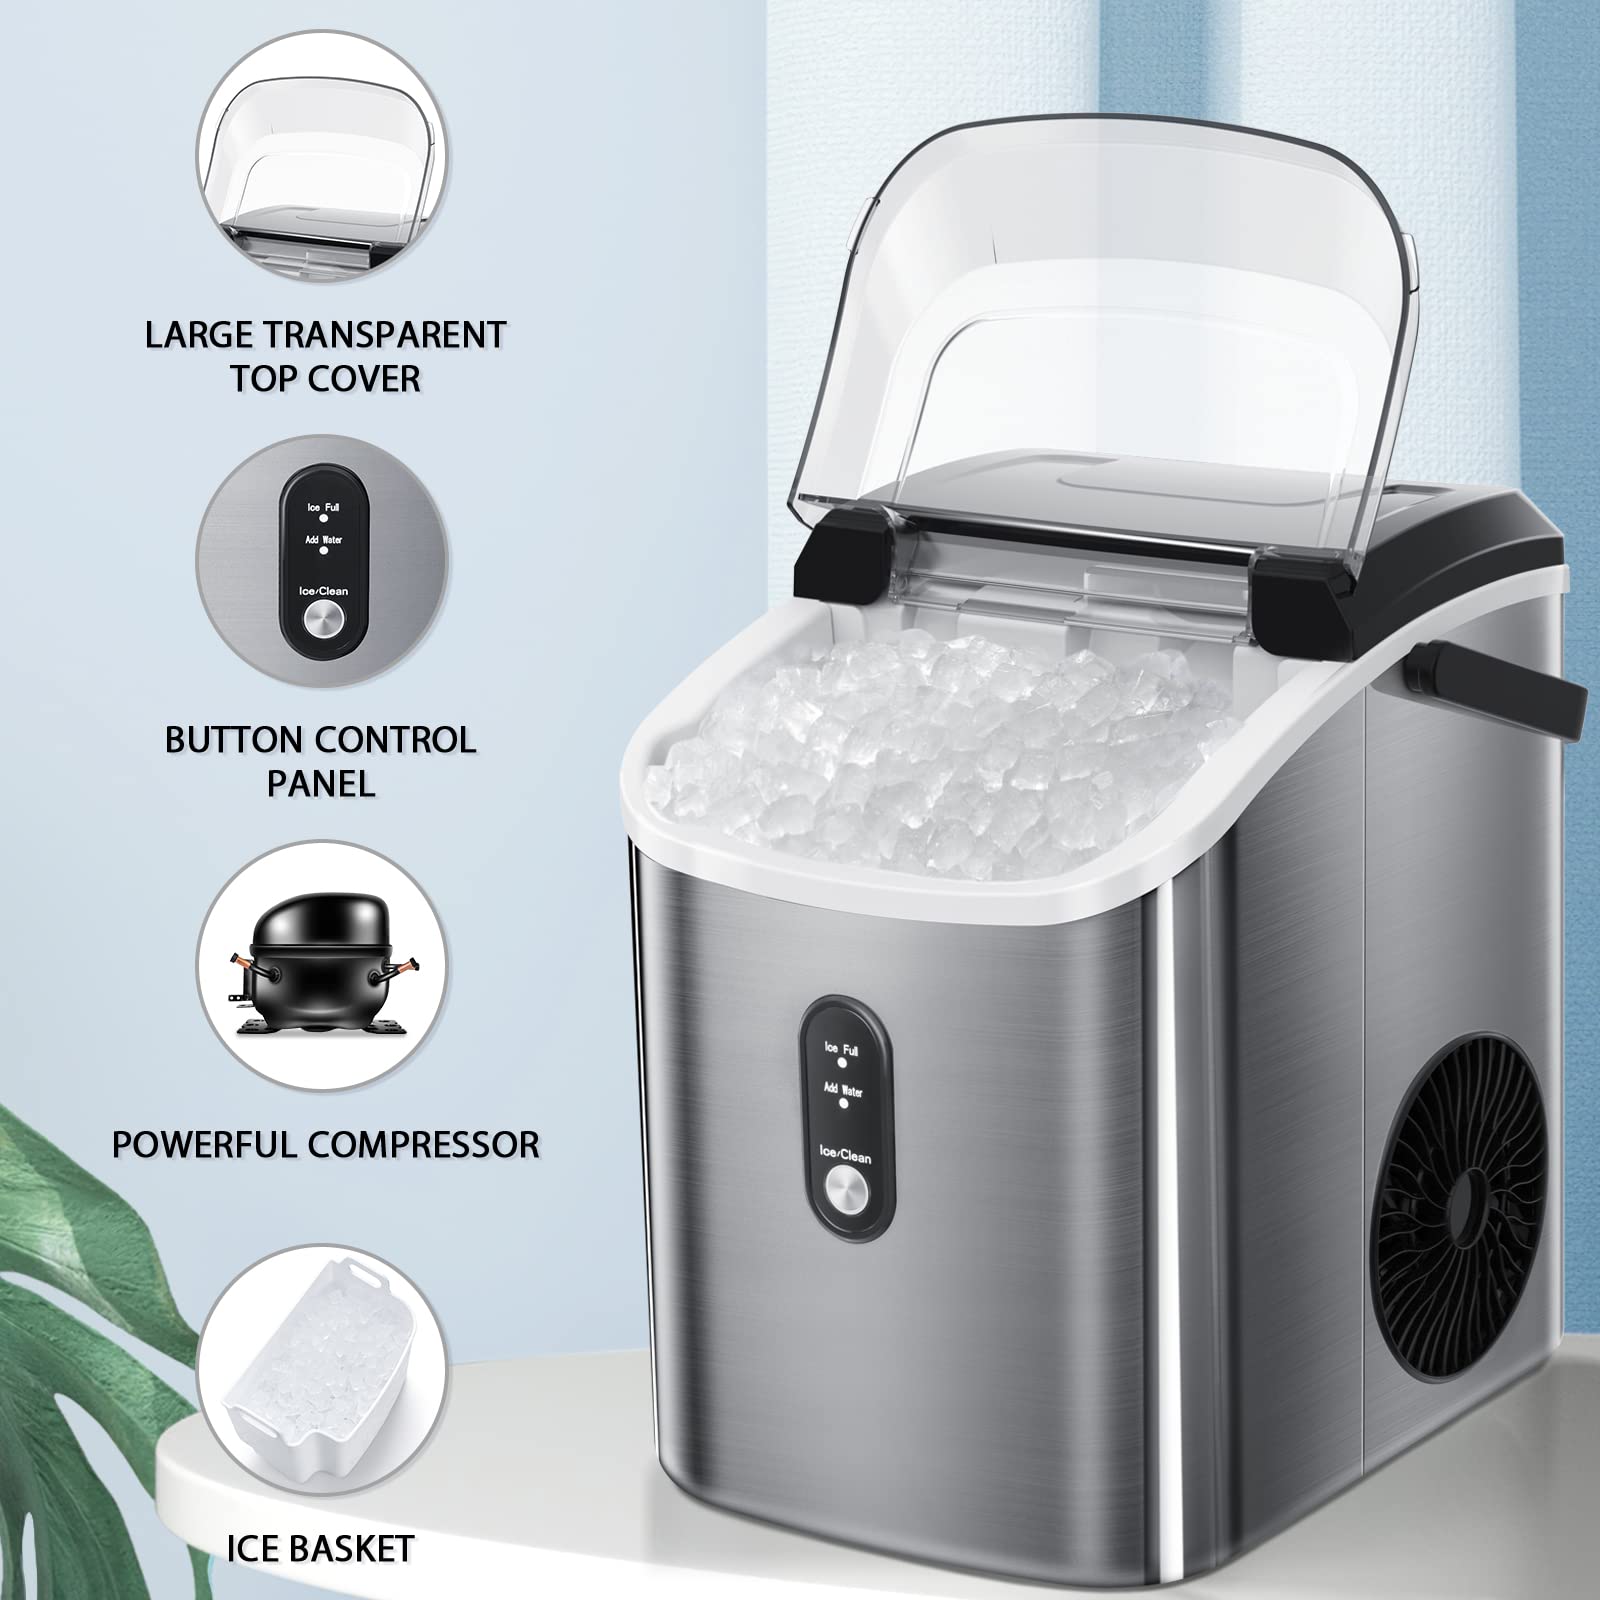 R.W.FLAME Nugget Ice Maker Countertop,Portable Compact Ice Maker Machine with Self-Cleaning Function,33Lbs/24H,for Home/Kitchen/Office/Bar